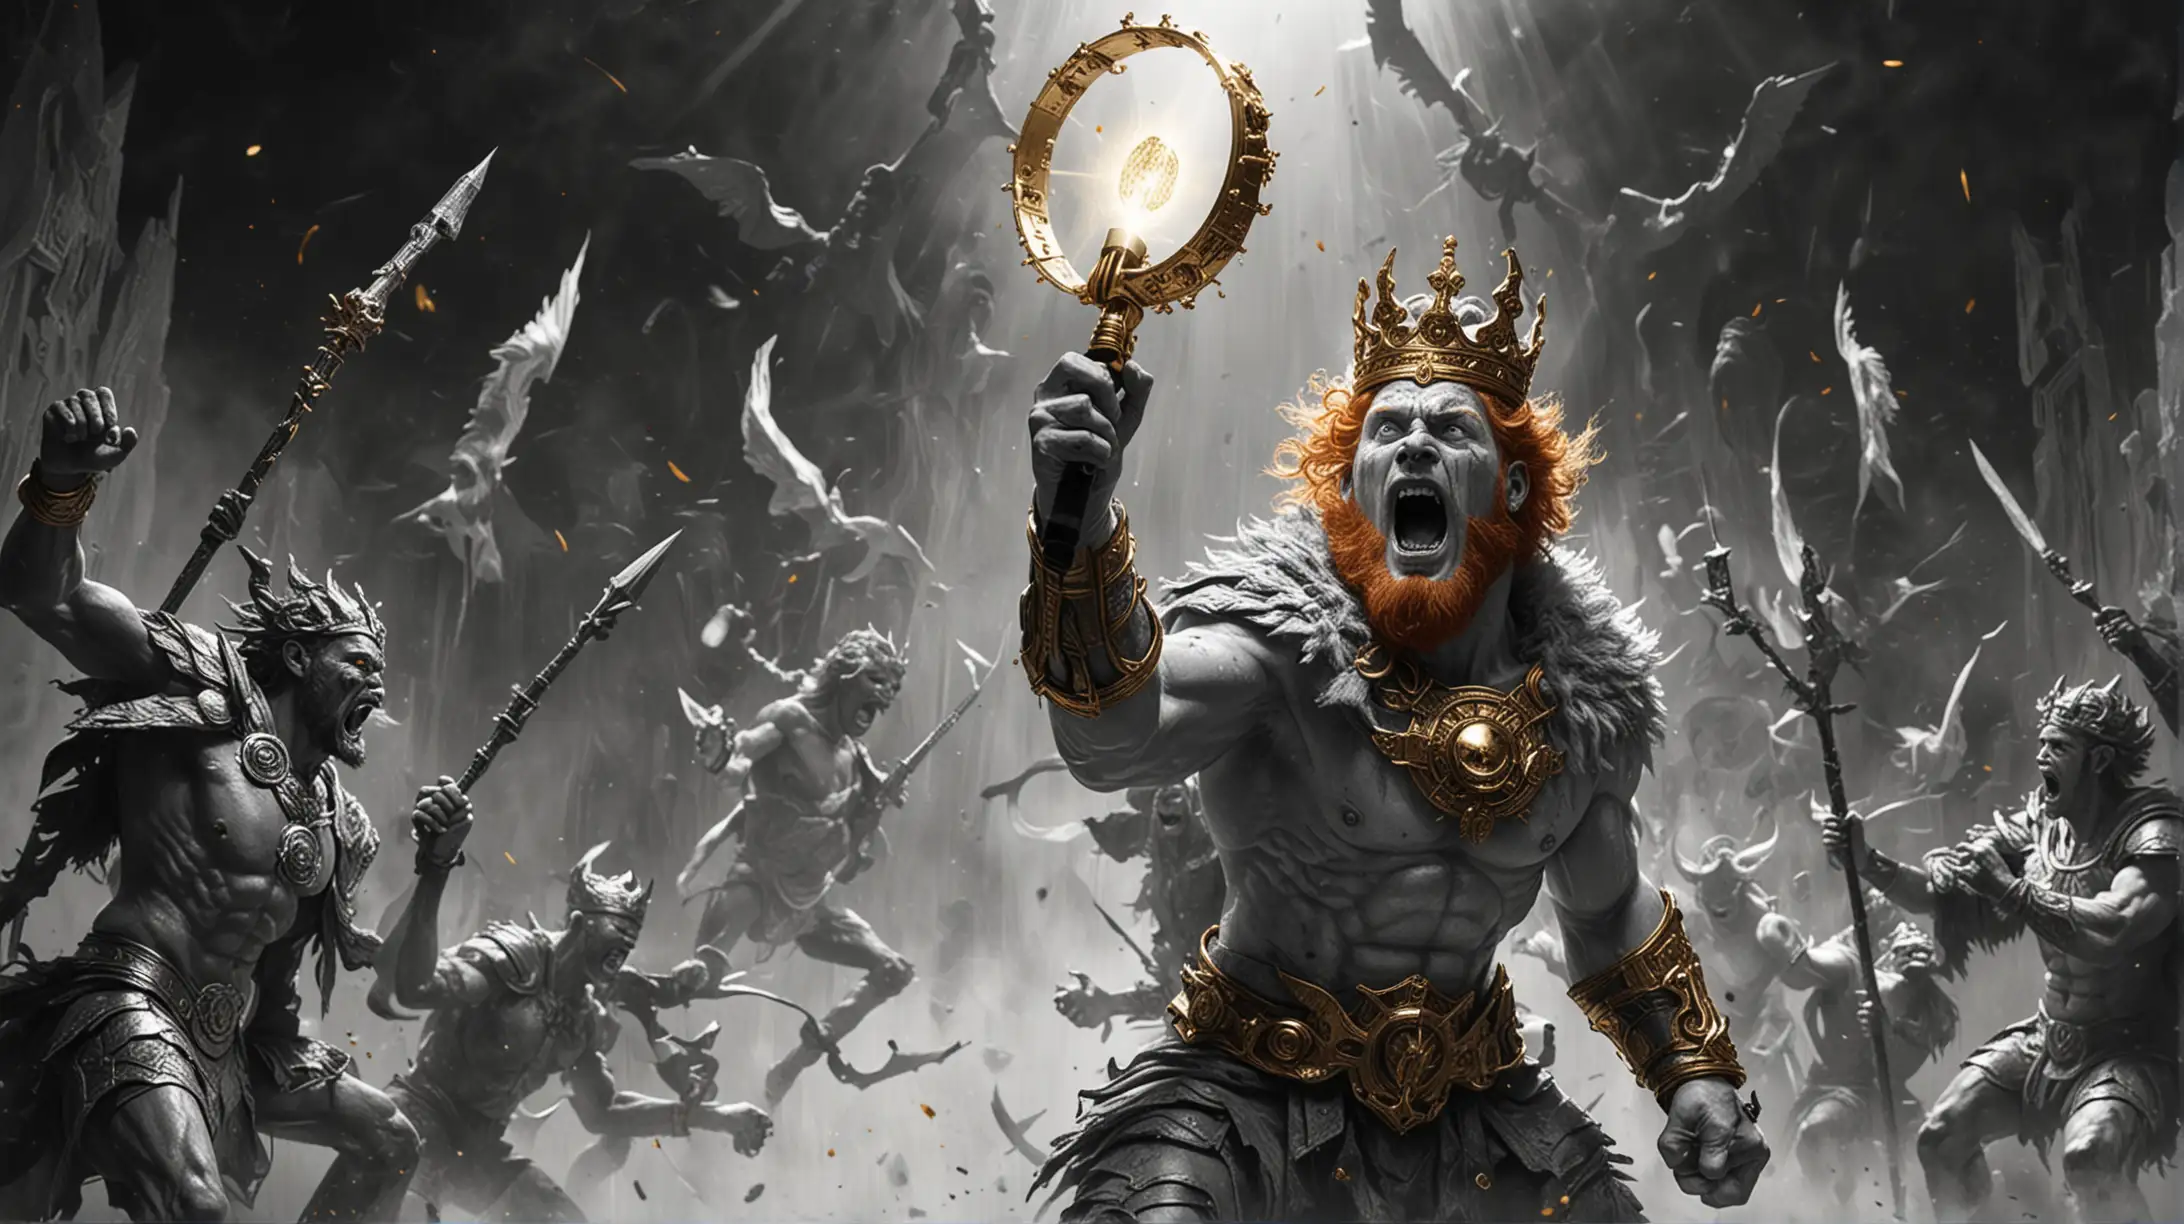 As a black and white abstract image, In an action pose, Ginge the God King fights off multiple demons with his gold microphone topped with a halo